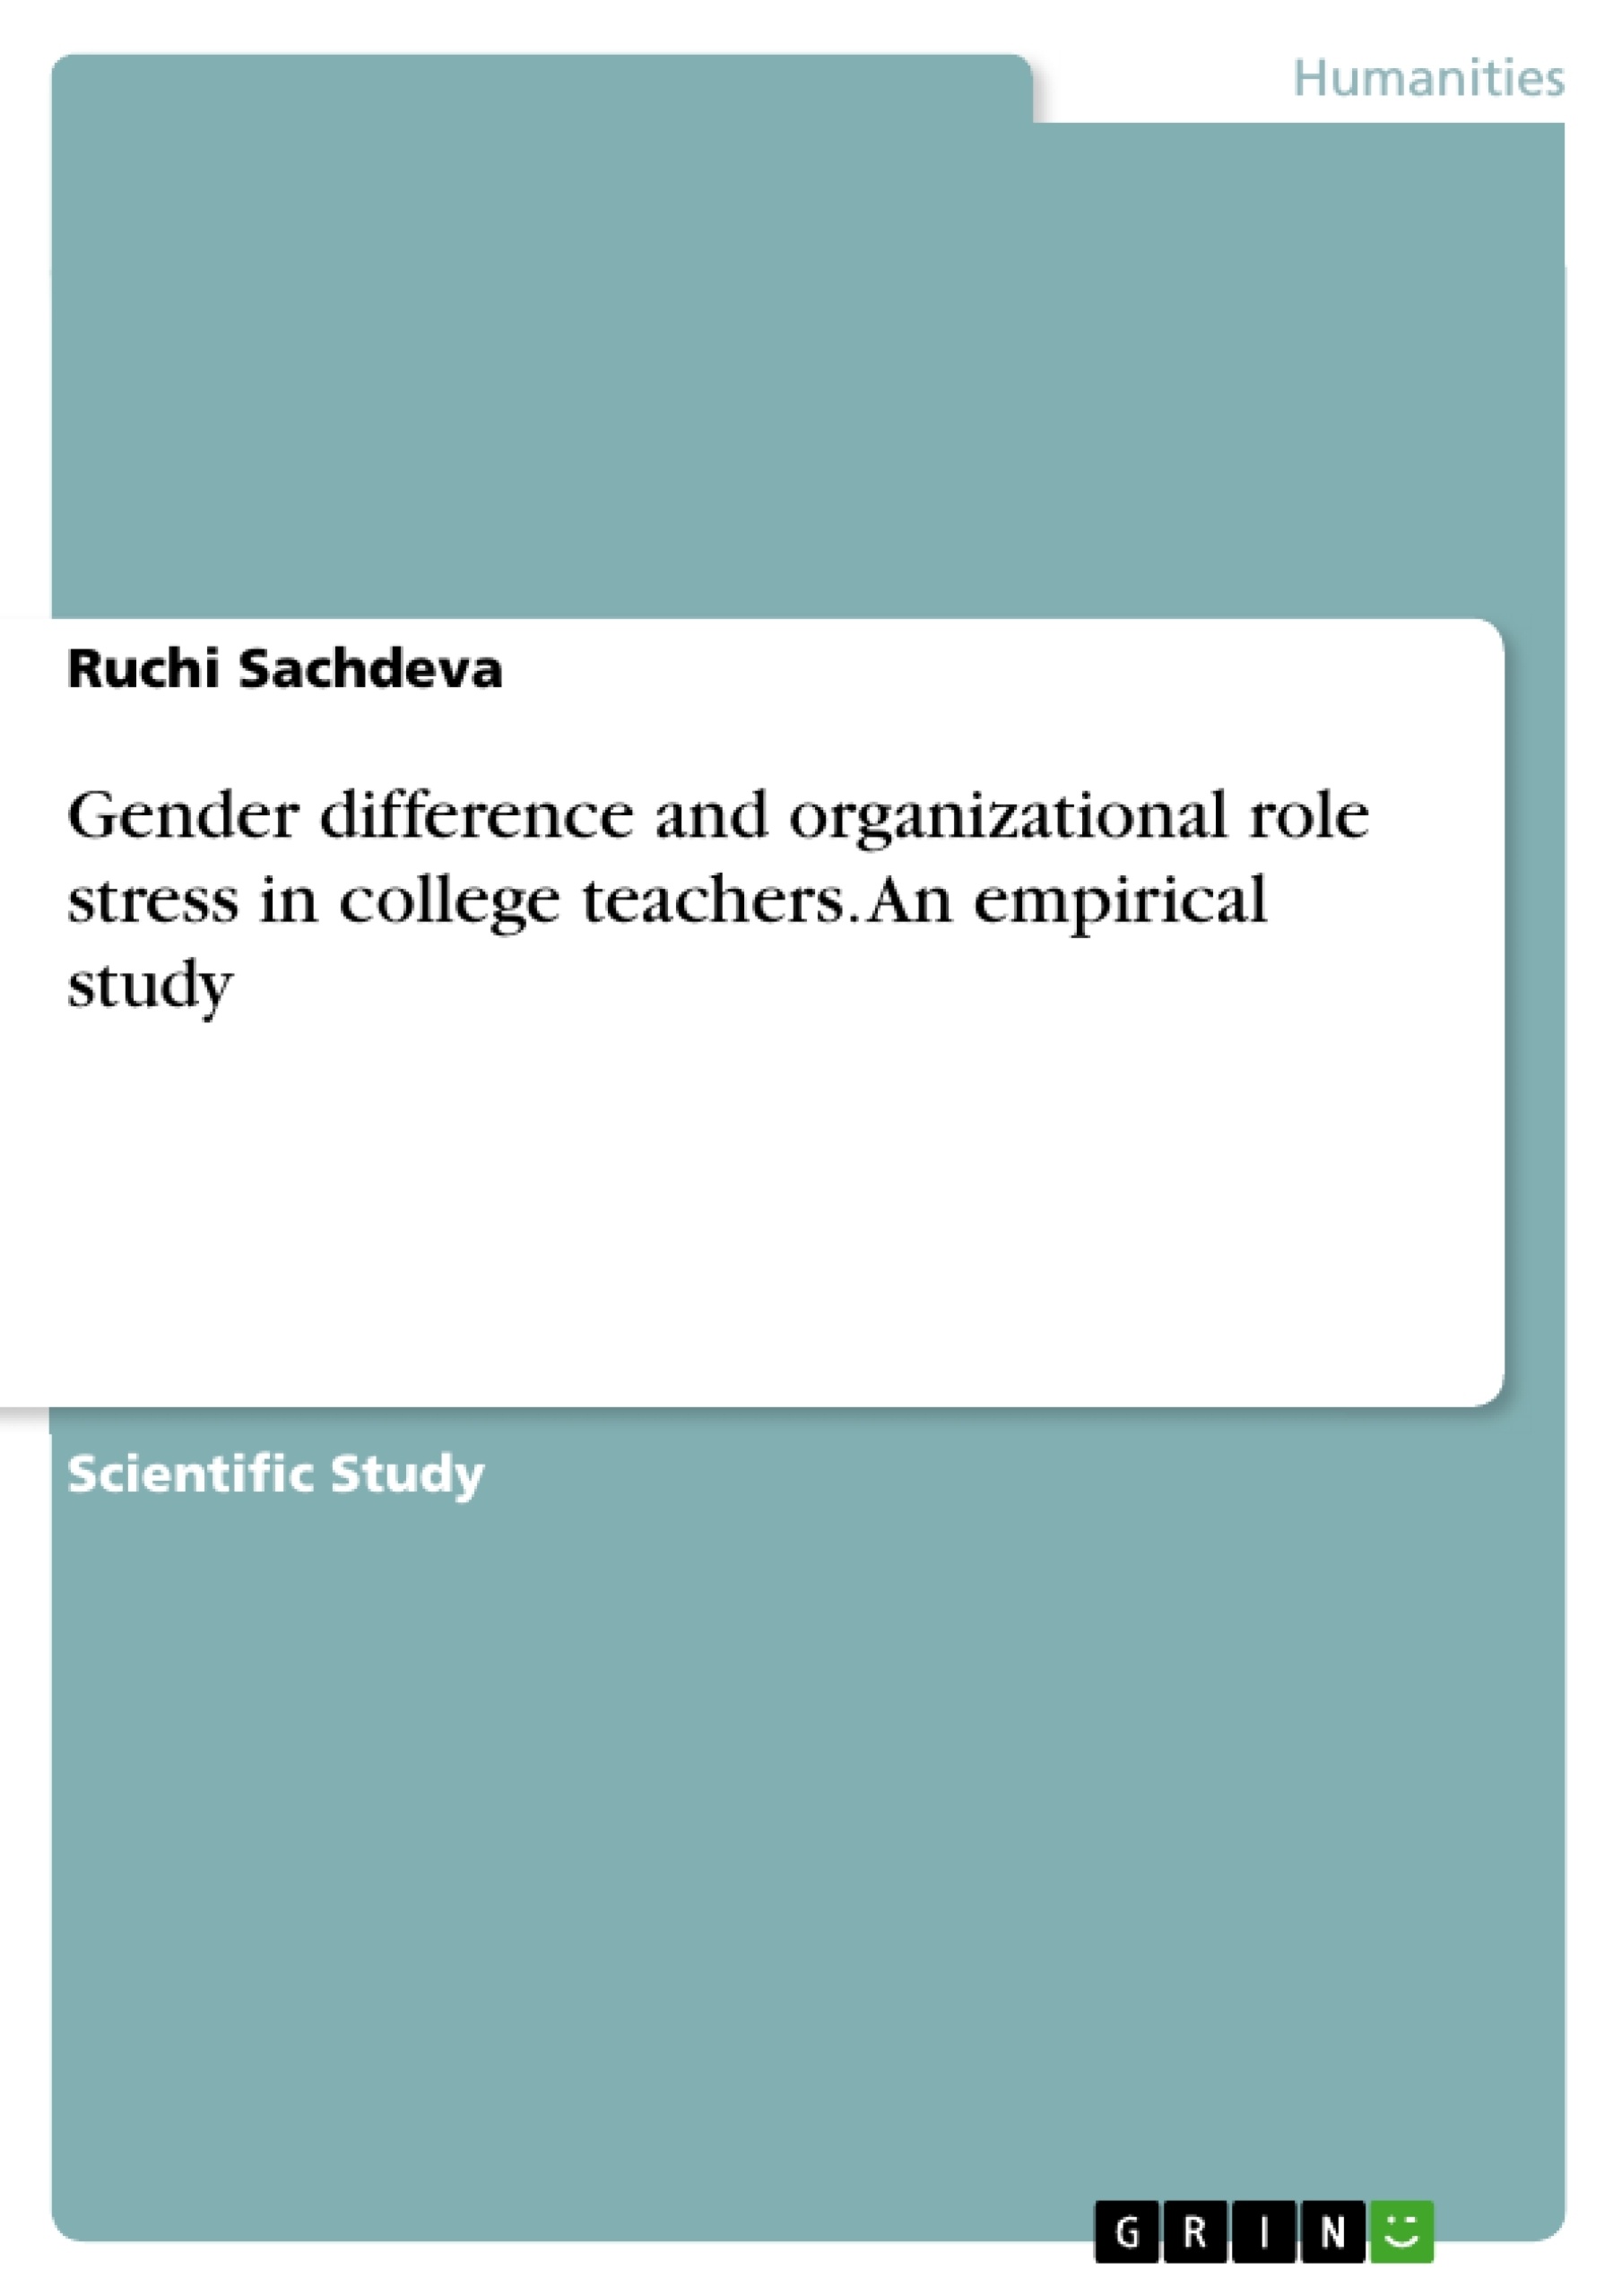 Title: Gender difference and organizational role stress in college teachers. An empirical study